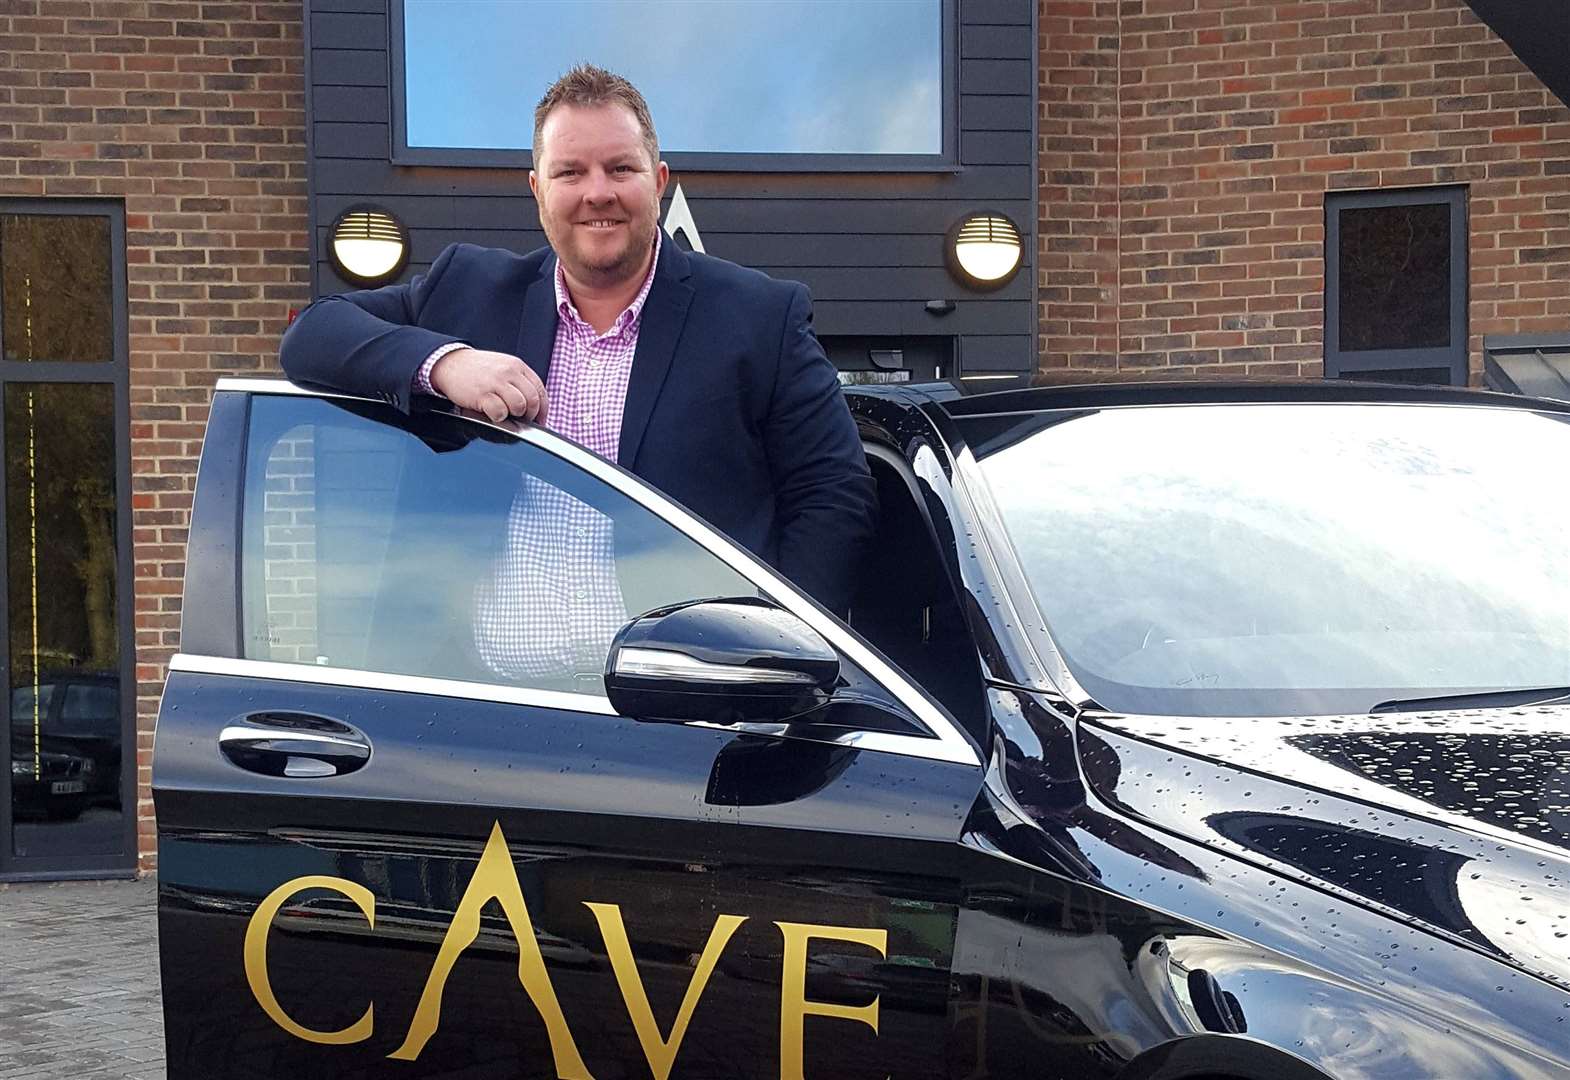 Cave Hotel CEO Johnathan Callister